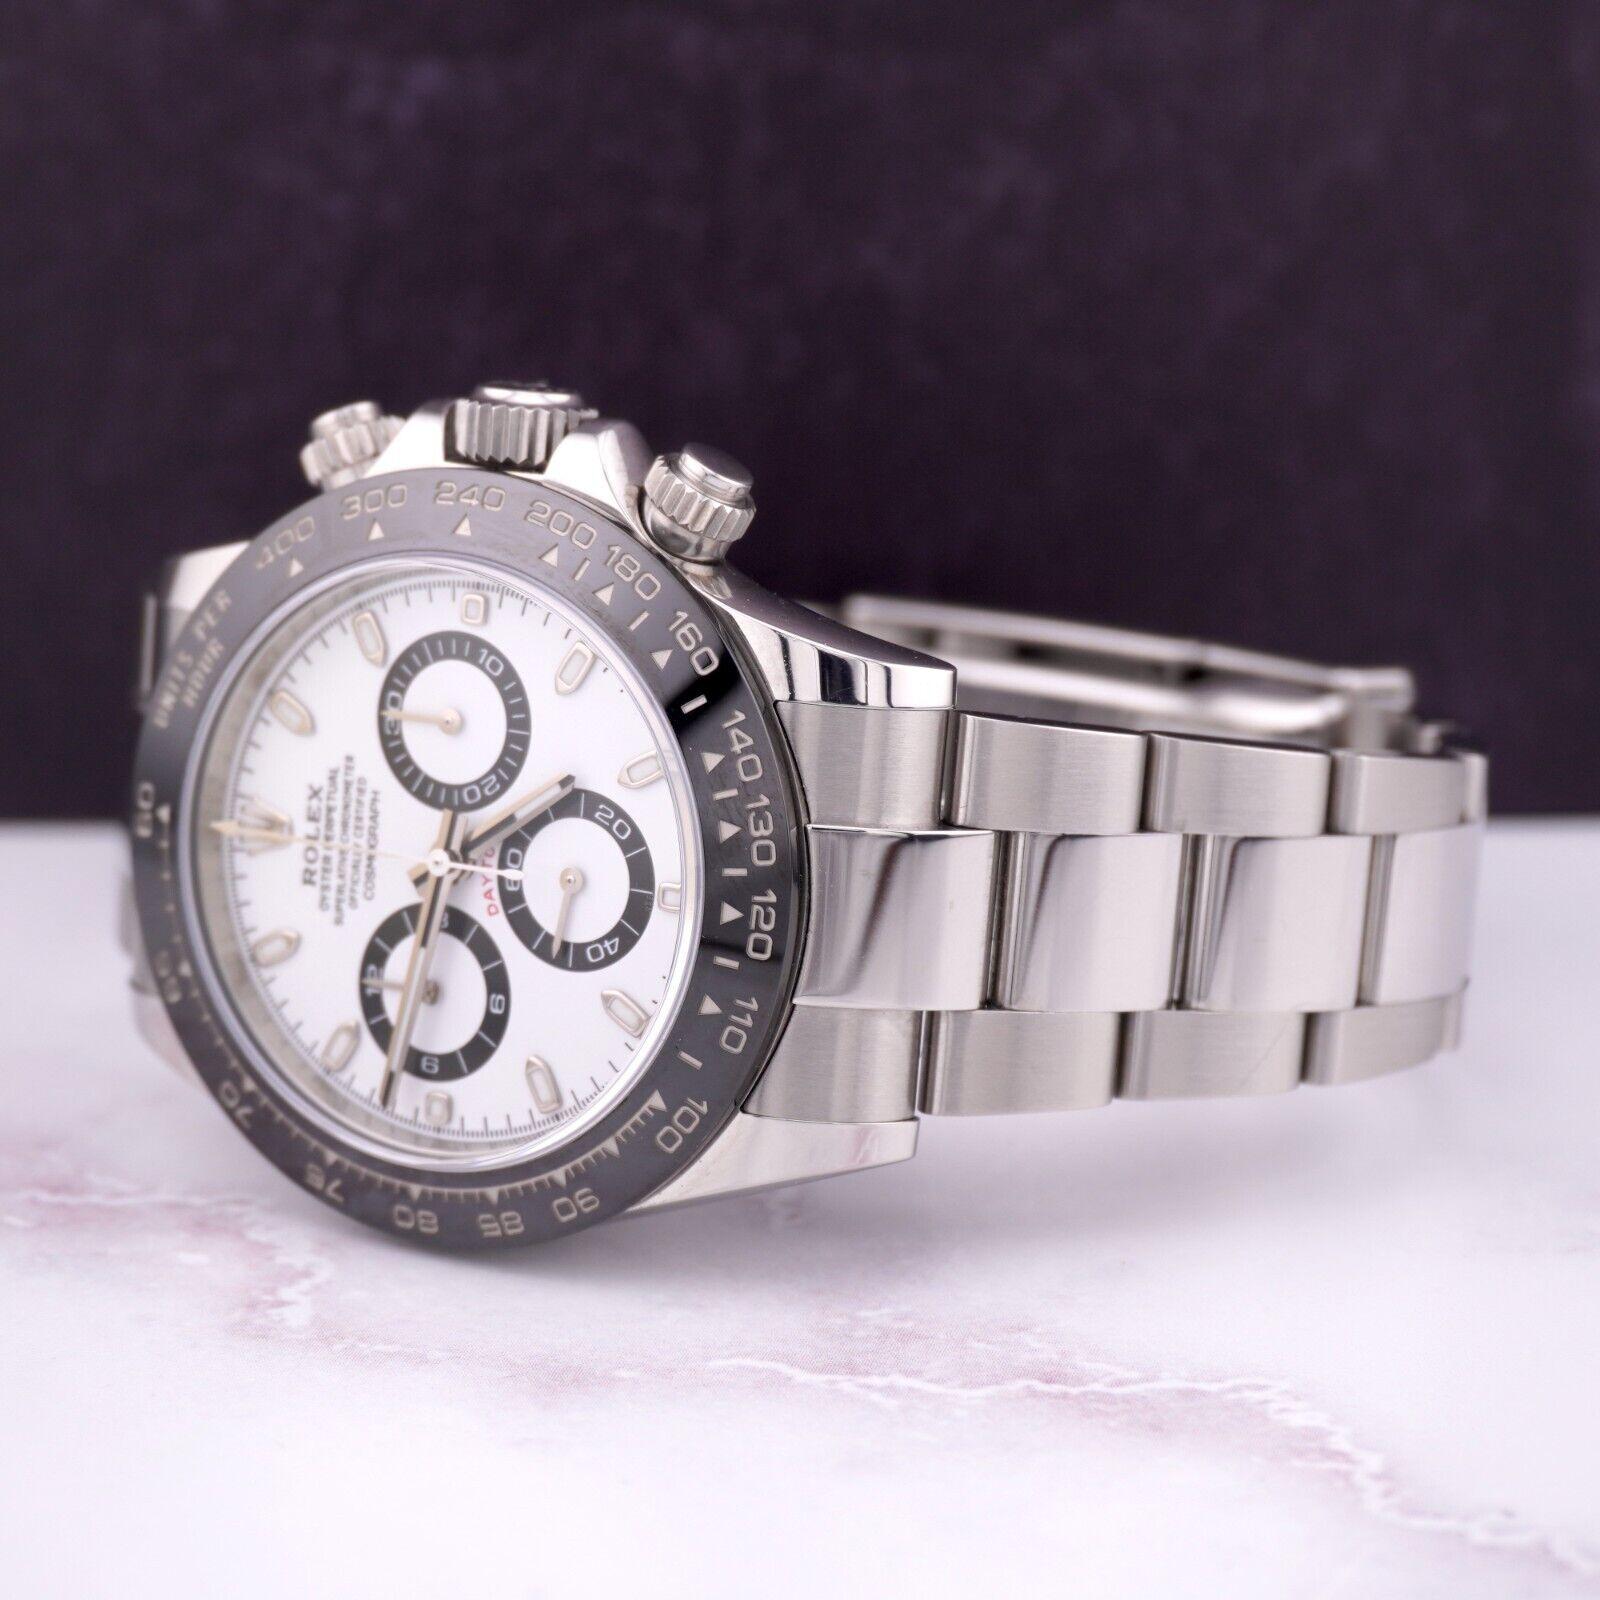 Rolex Daytona Cosmograph 40mm Panda Men Oyster White Dial Chrono Watch 116500LN In Excellent Condition For Sale In Pleasanton, CA